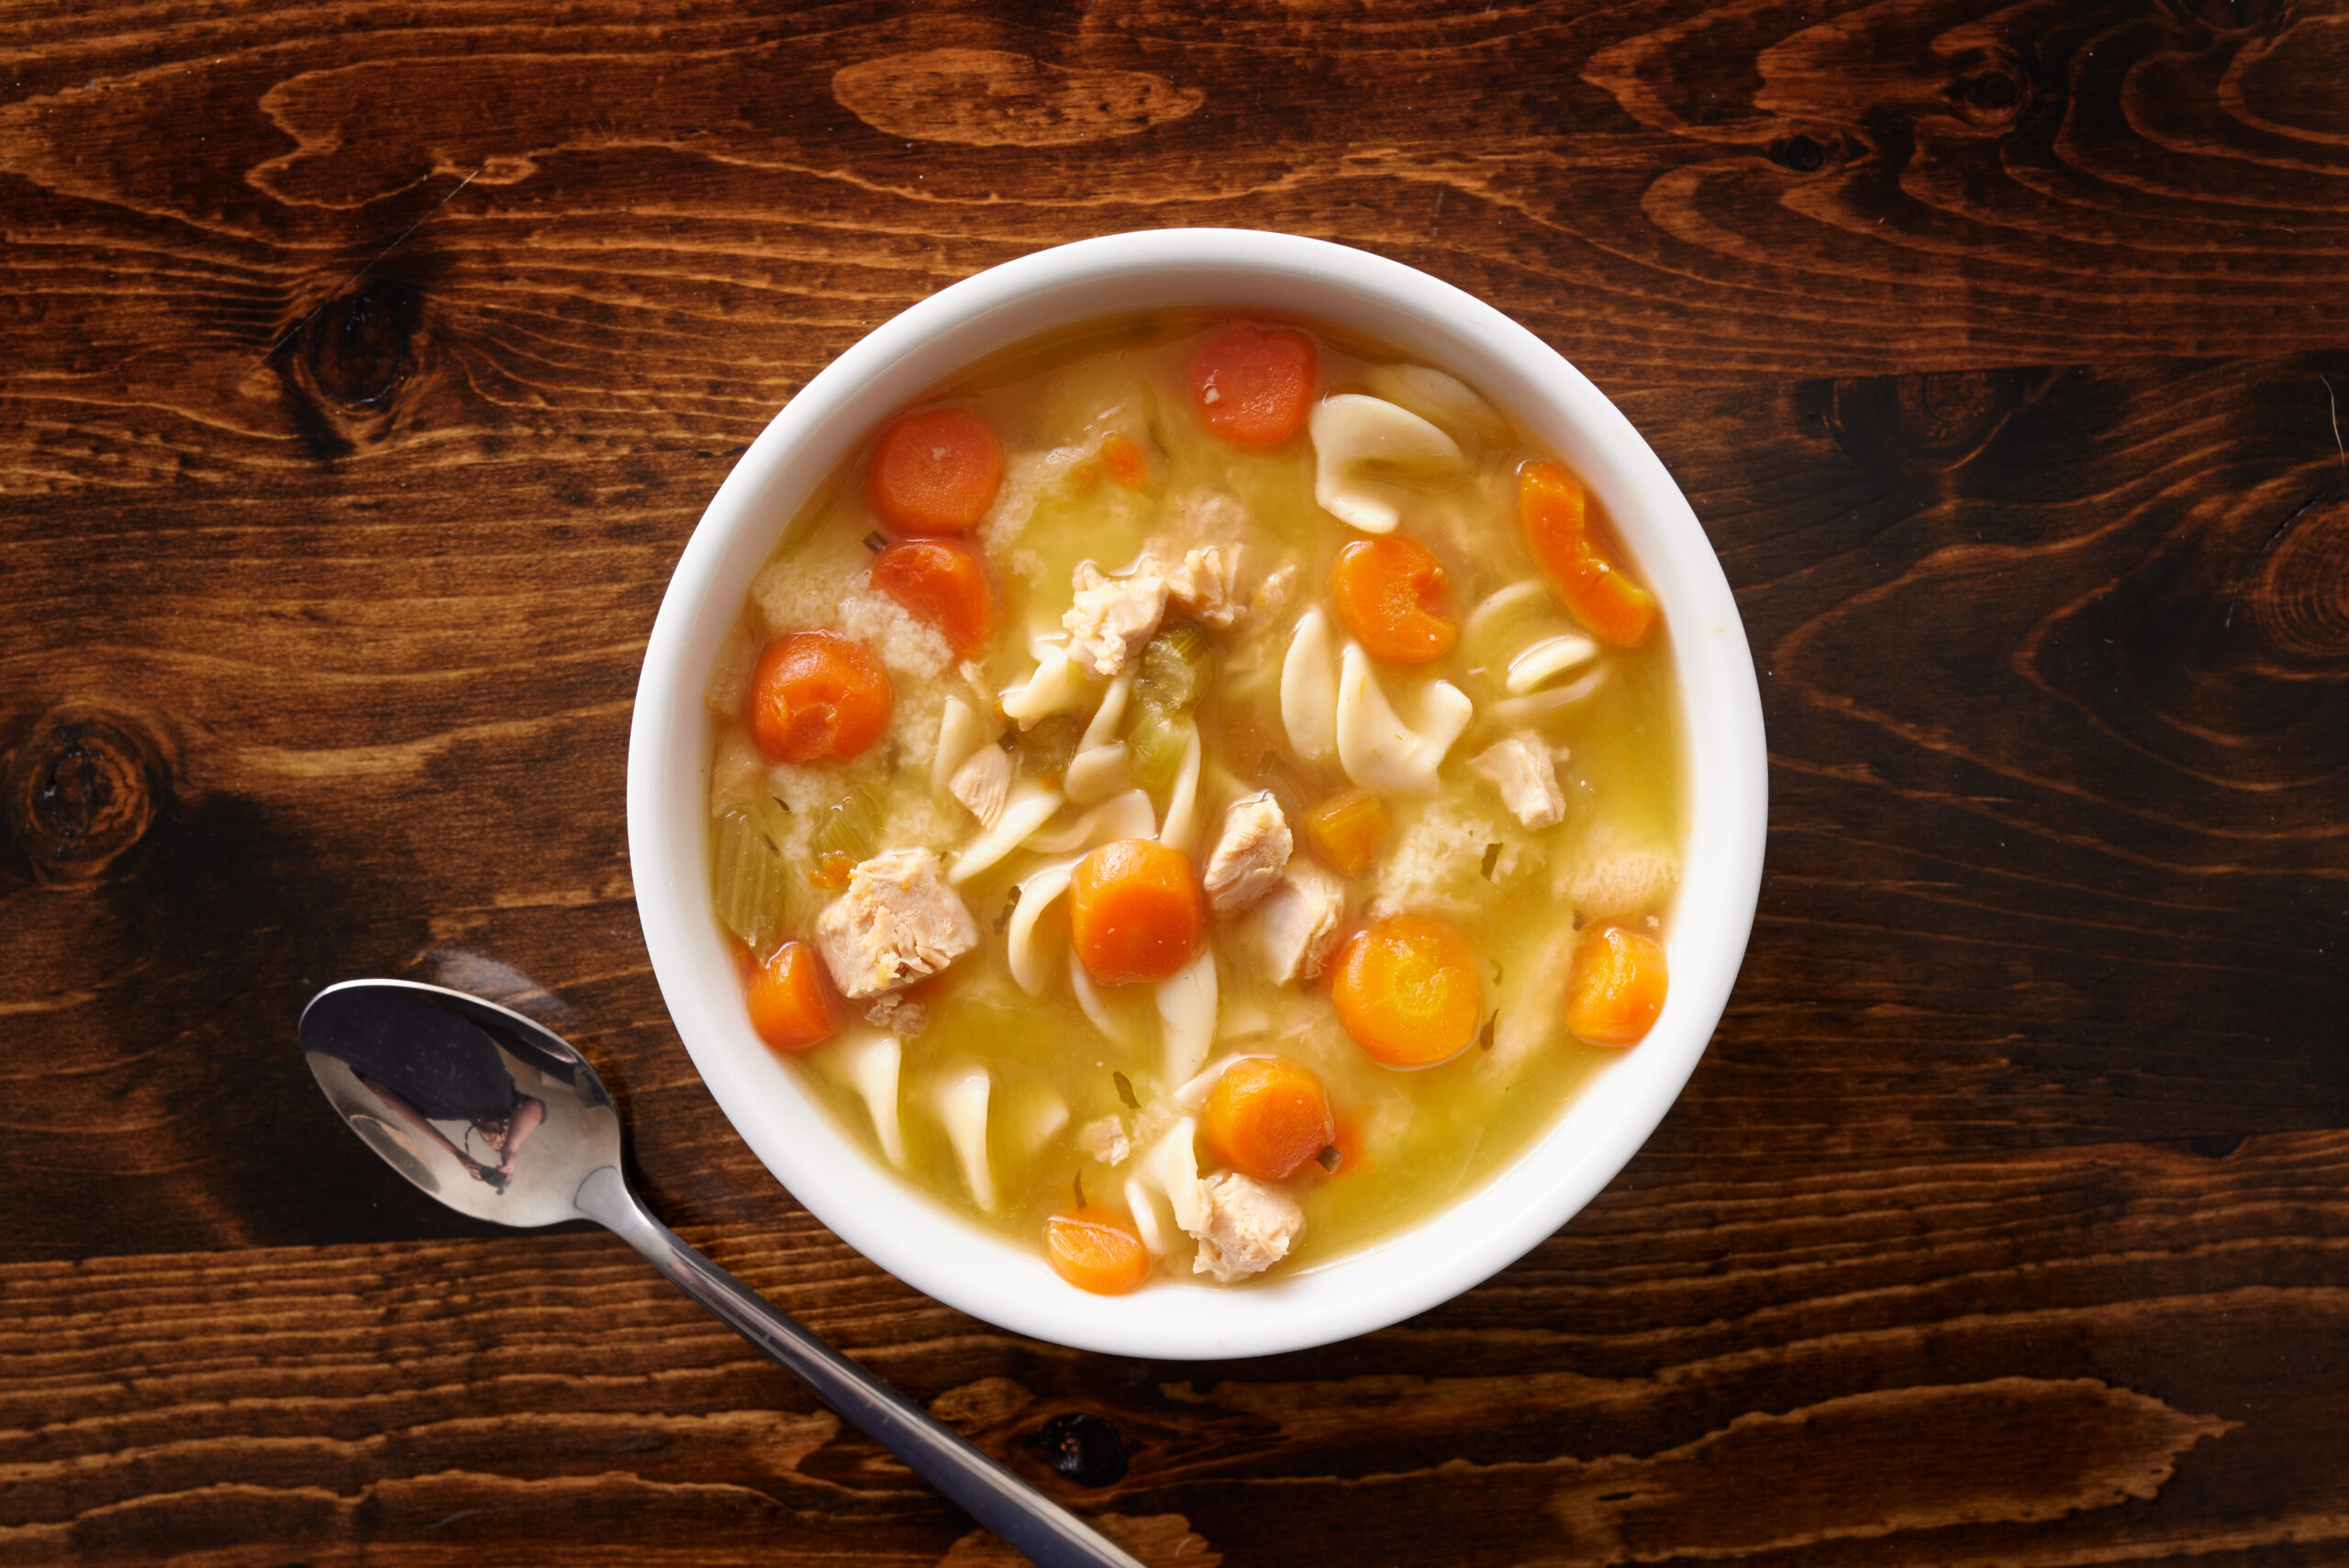 <h1 class="tribe-events-single-event-title">OTHO UNITED METHODIST CHURCH SOUP SUPPER</h1>